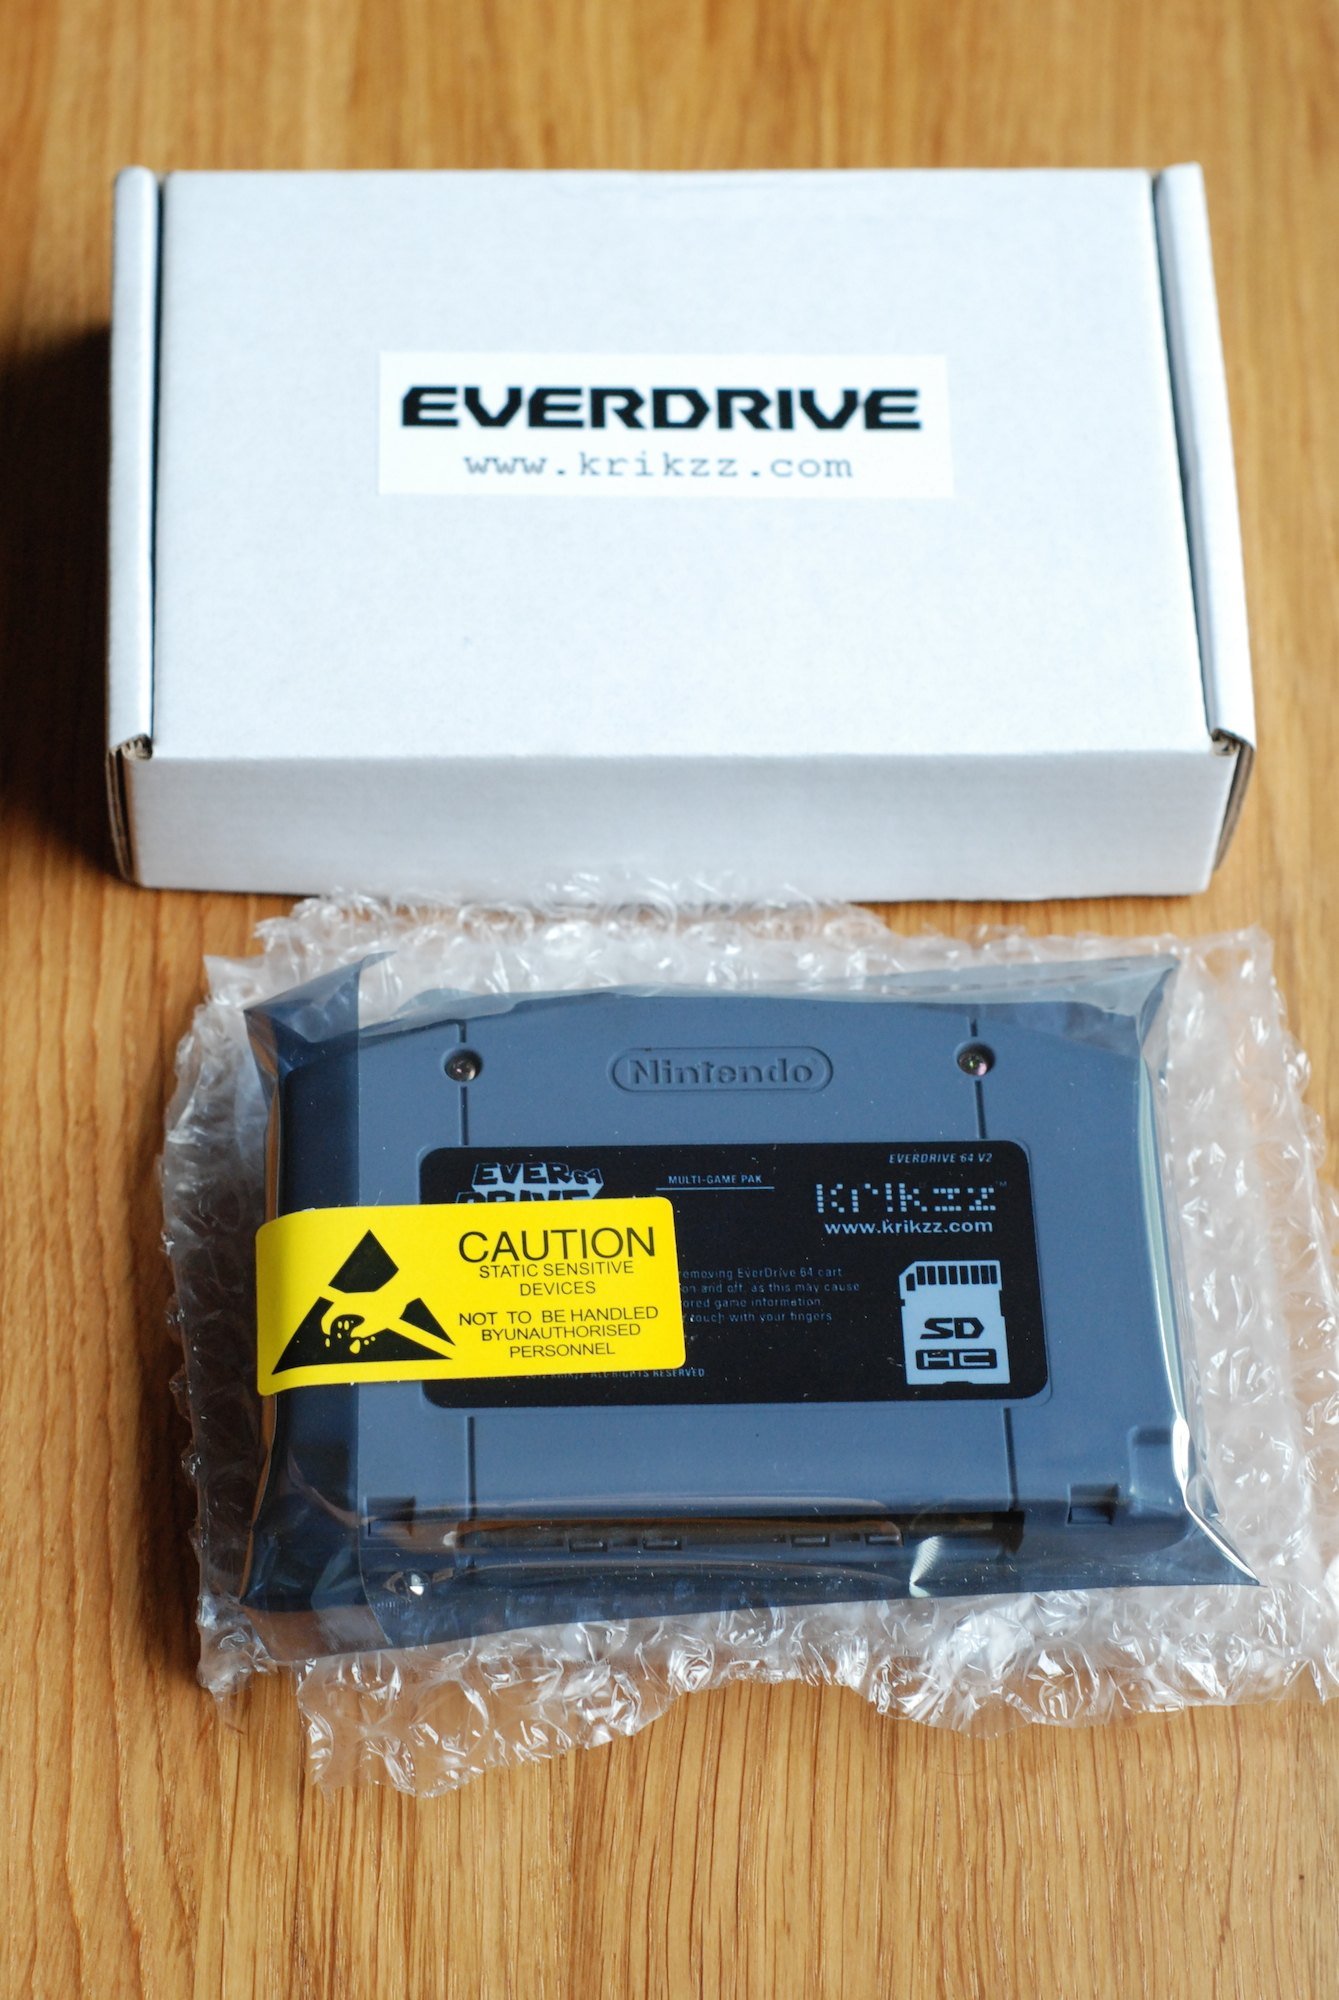 Everdrive 64 v2 Review (Hardware) - Official GBAtemp Review | GBAtemp.net -  The Independent Video Game Community